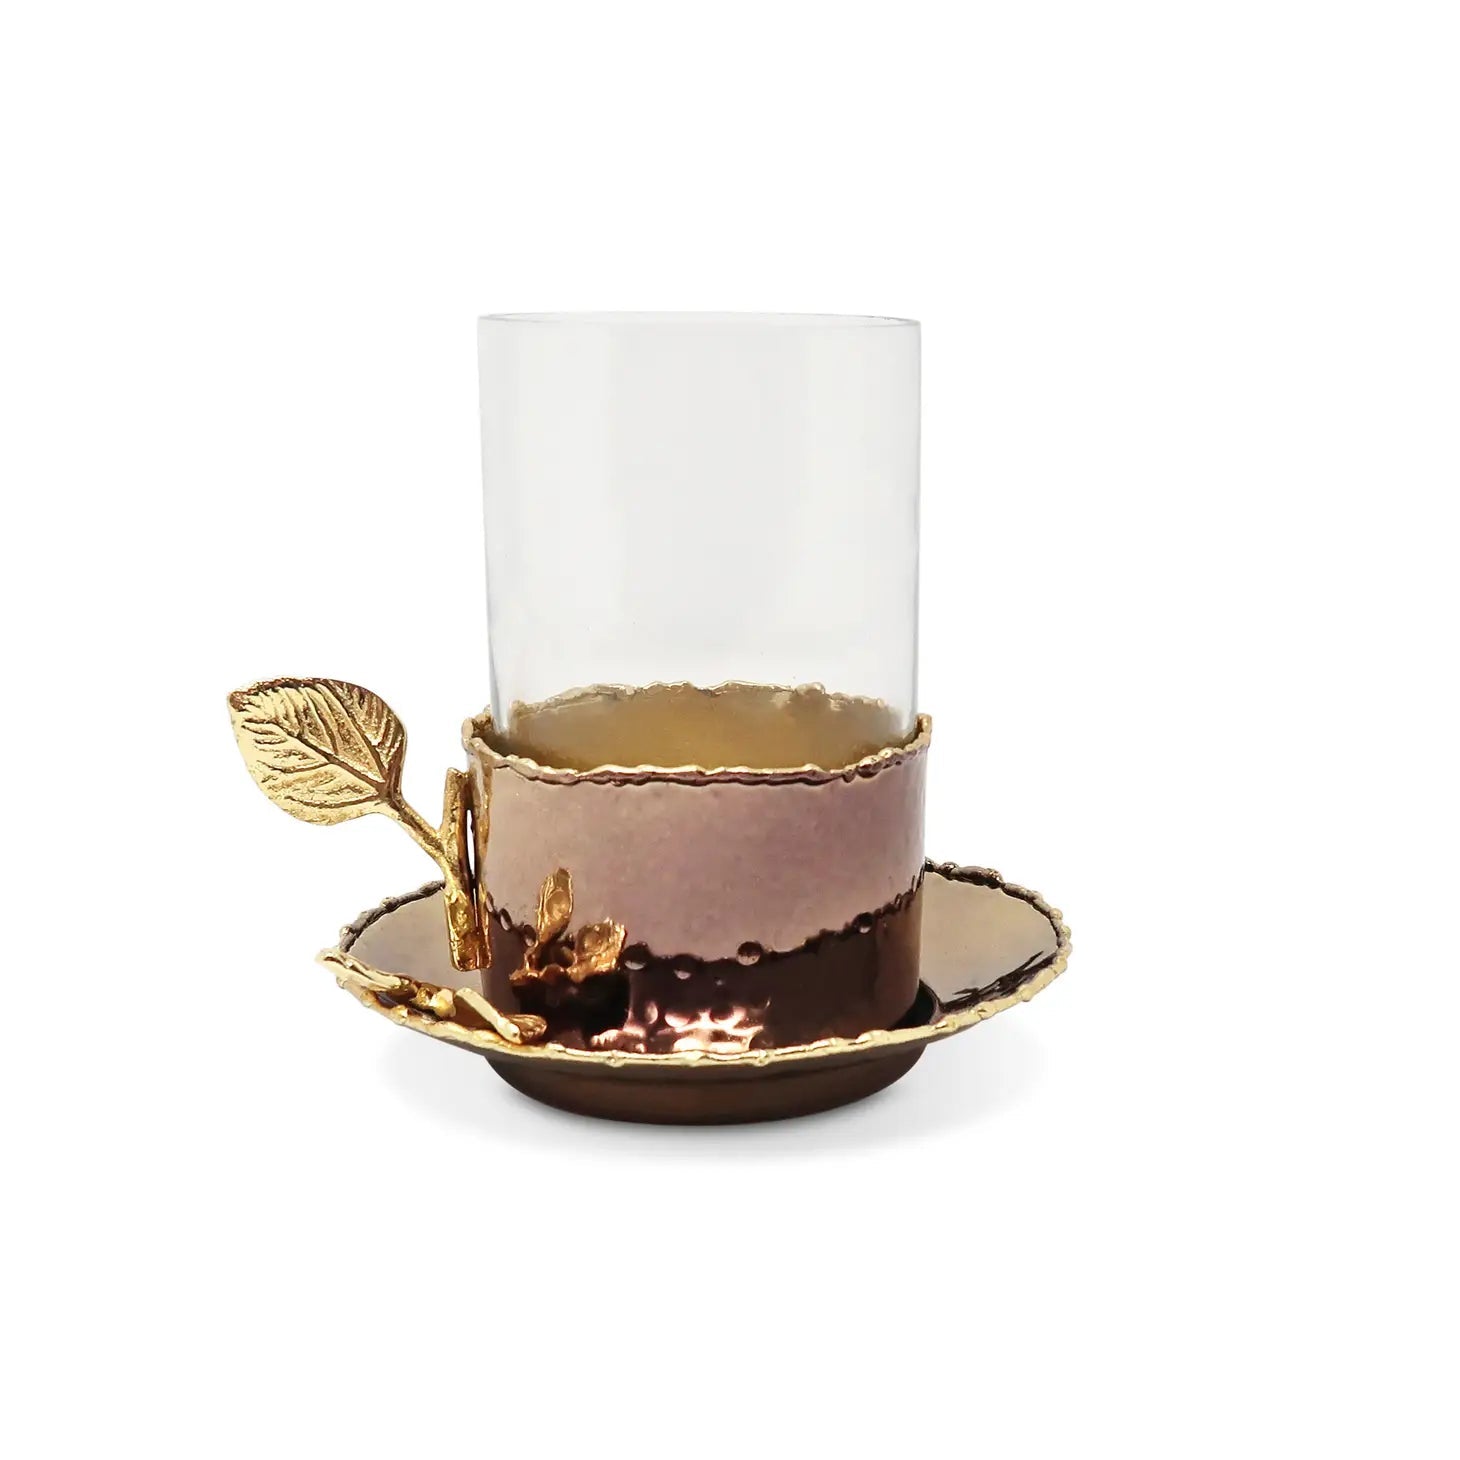 Glass Cup and Plate with Leaf Flower Design Mugs and Tea Cup High Class Touch - Home Decor 